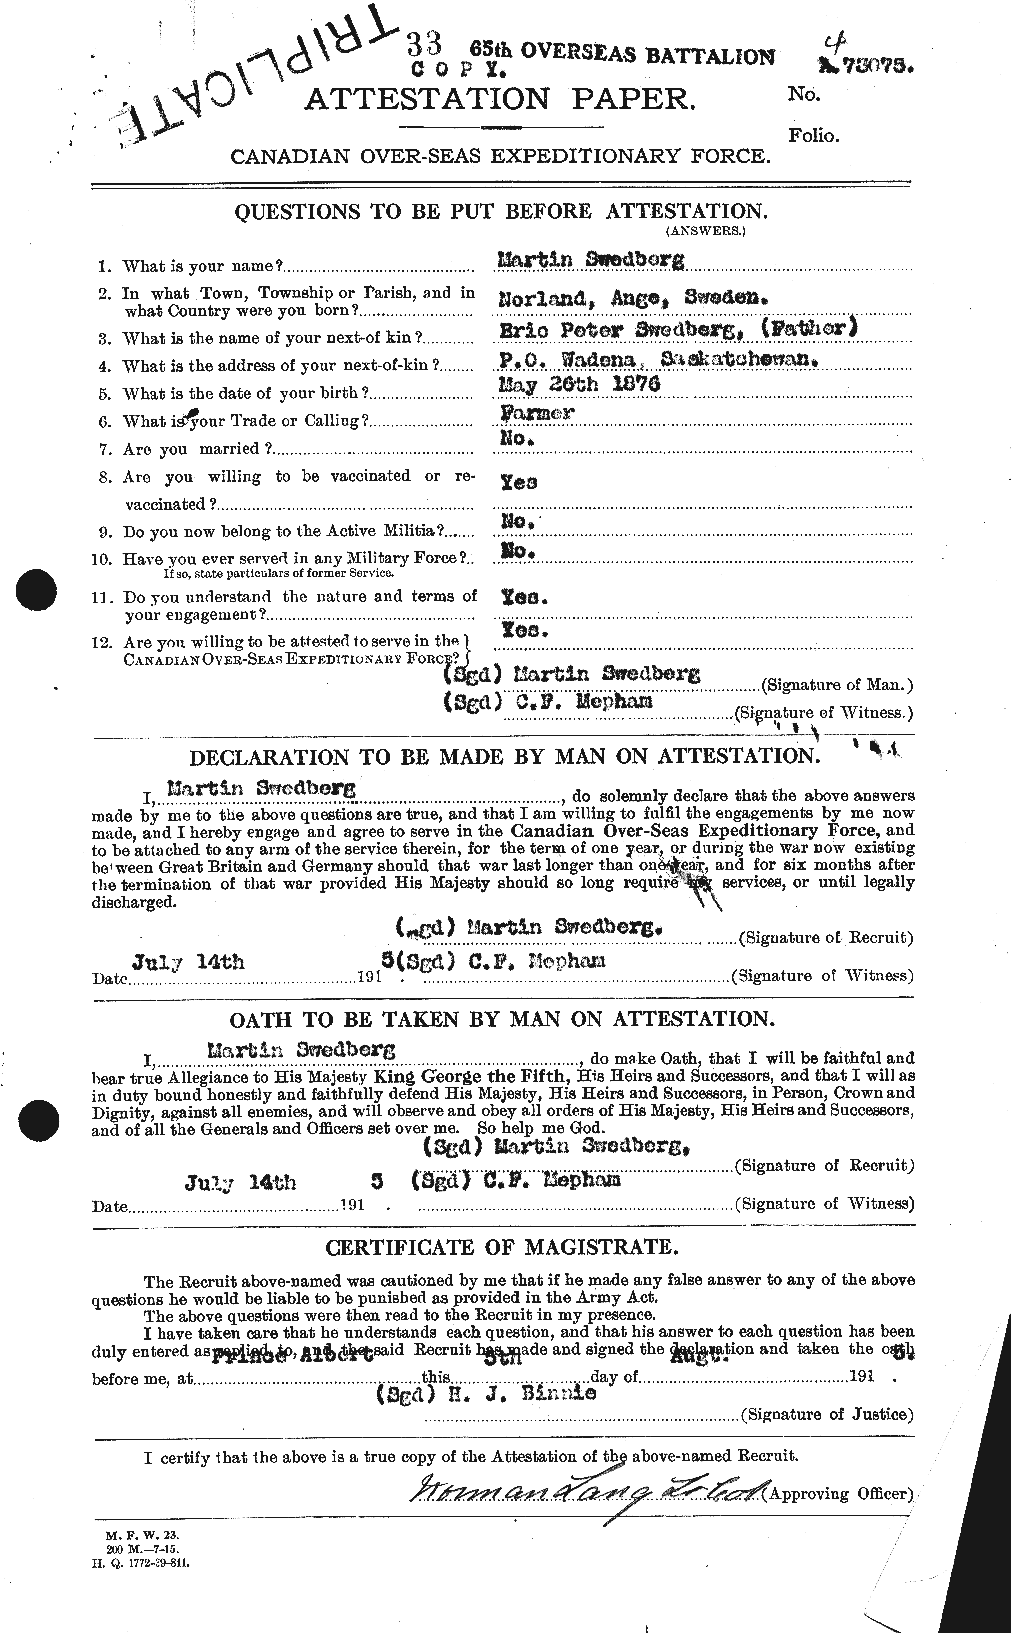 Personnel Records of the First World War - CEF 083292a